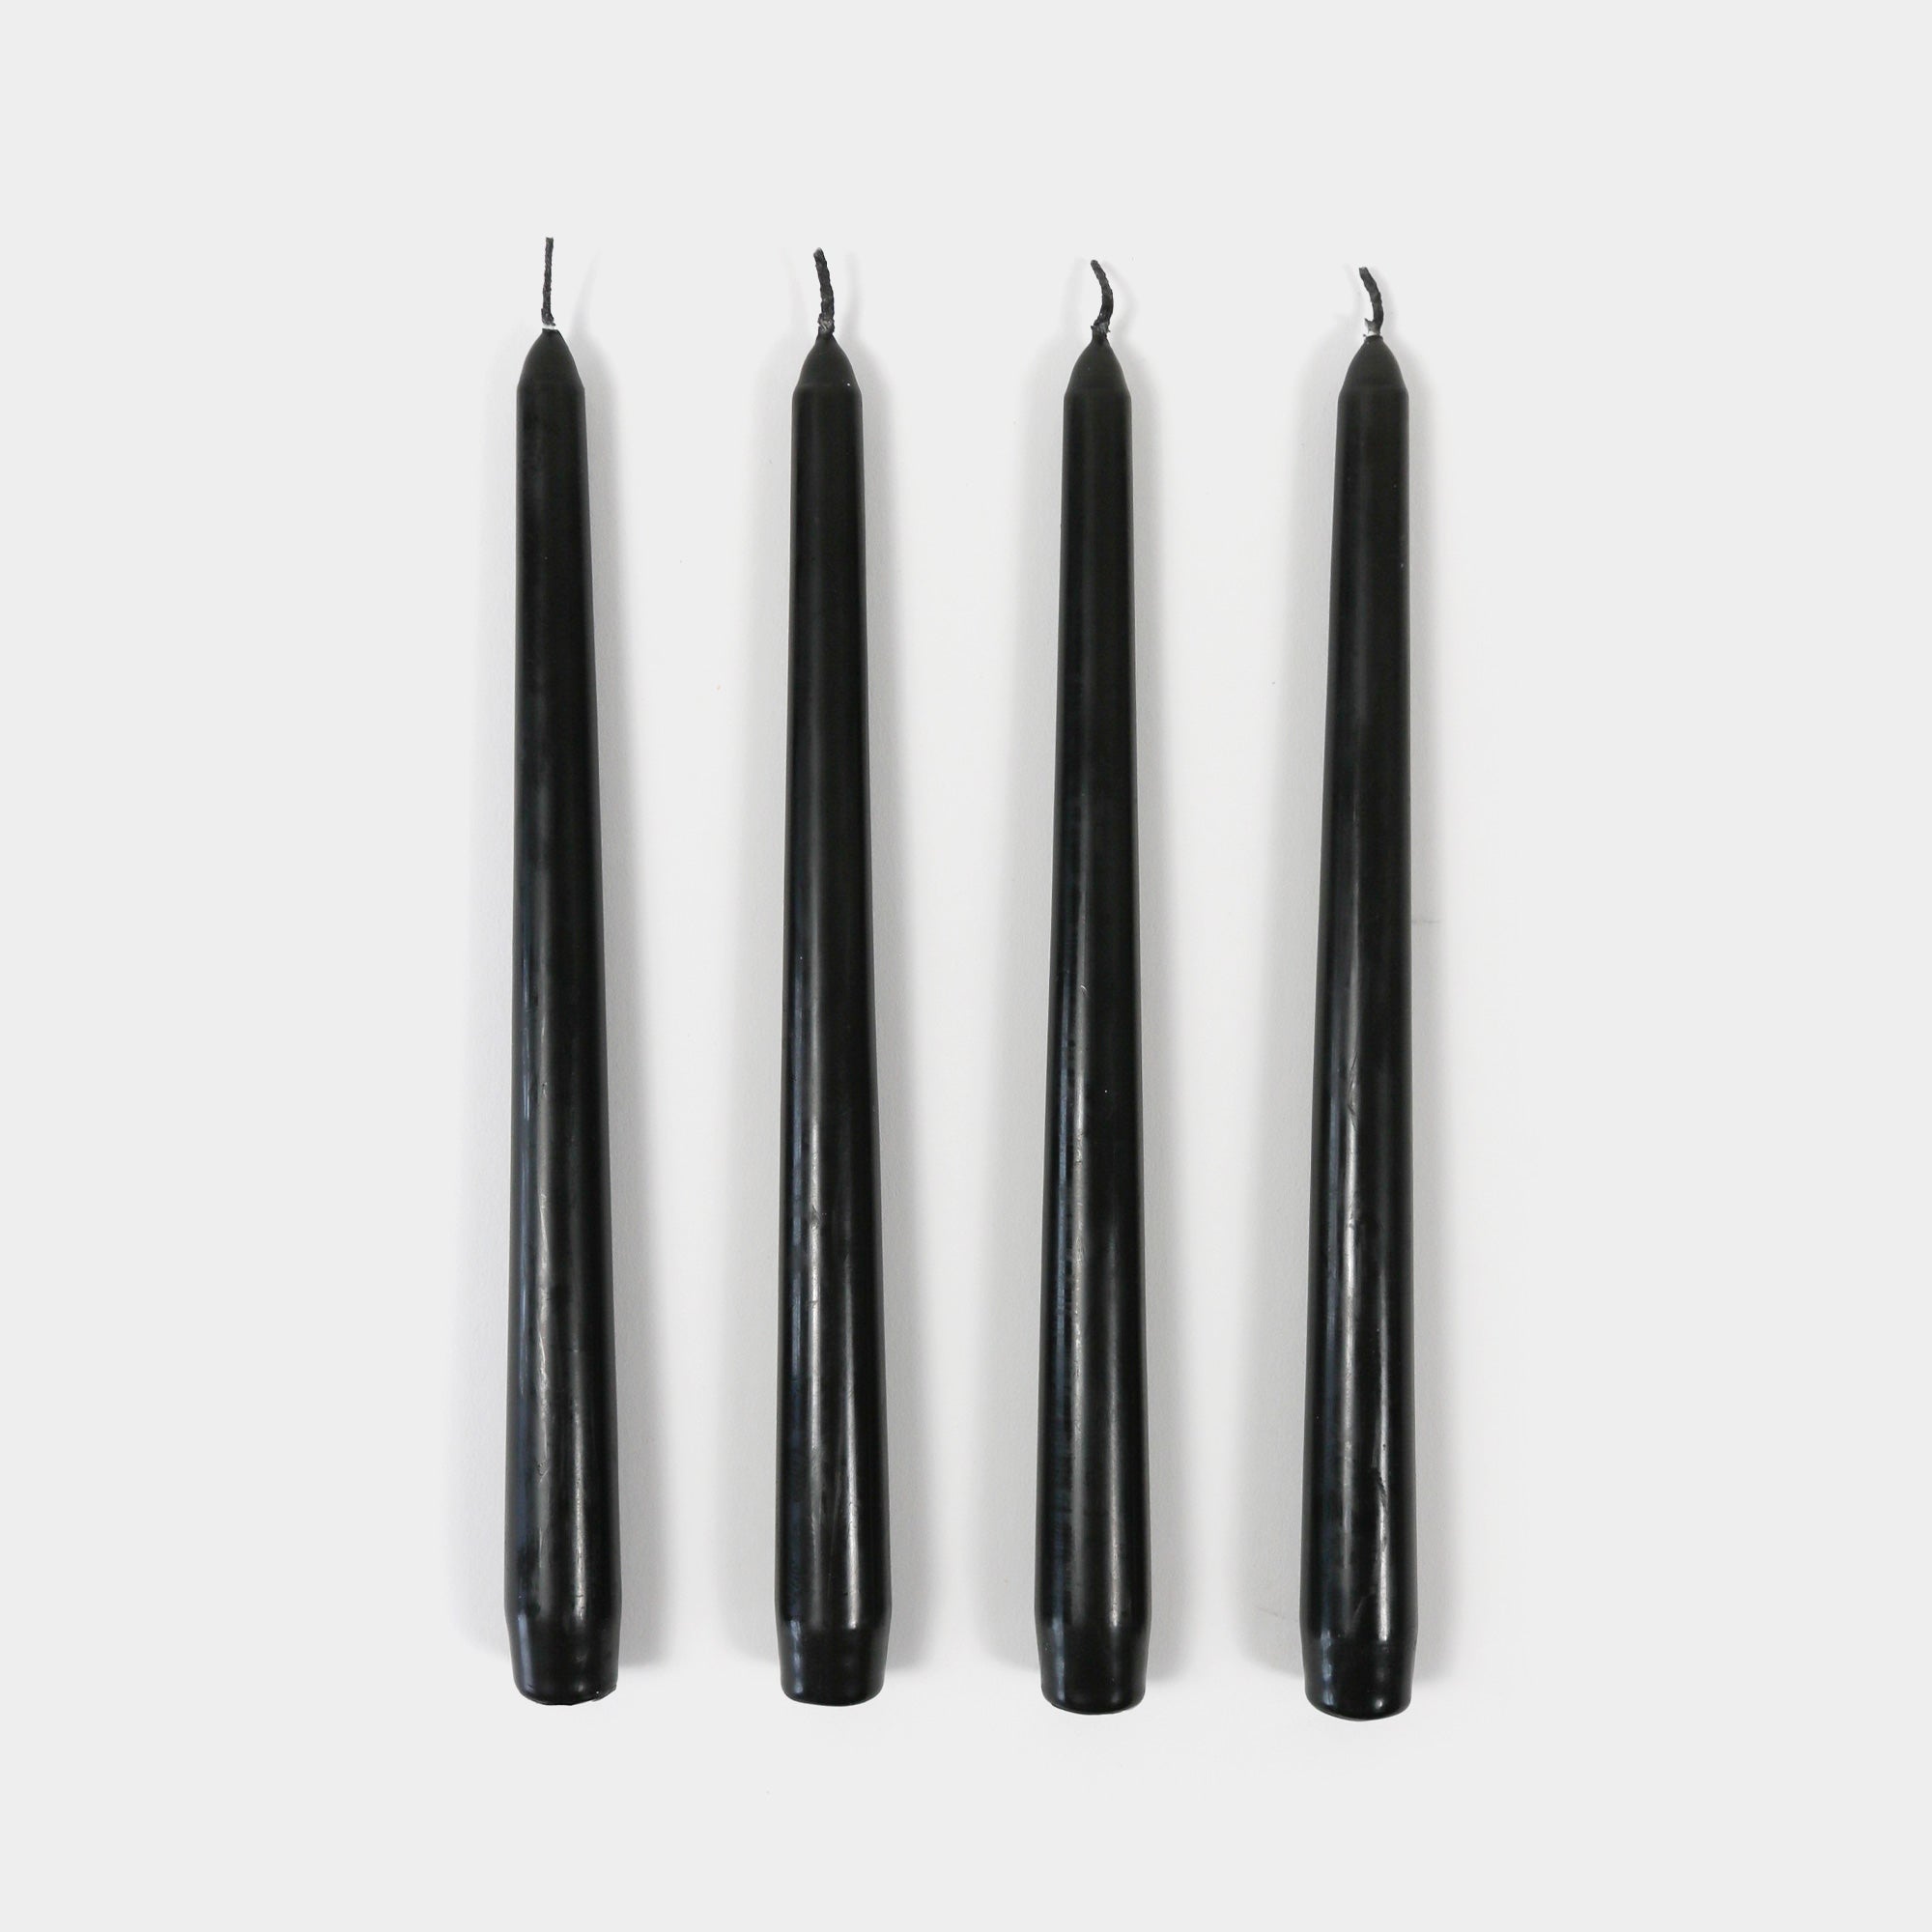 Taper Candles 4 Pack - Black